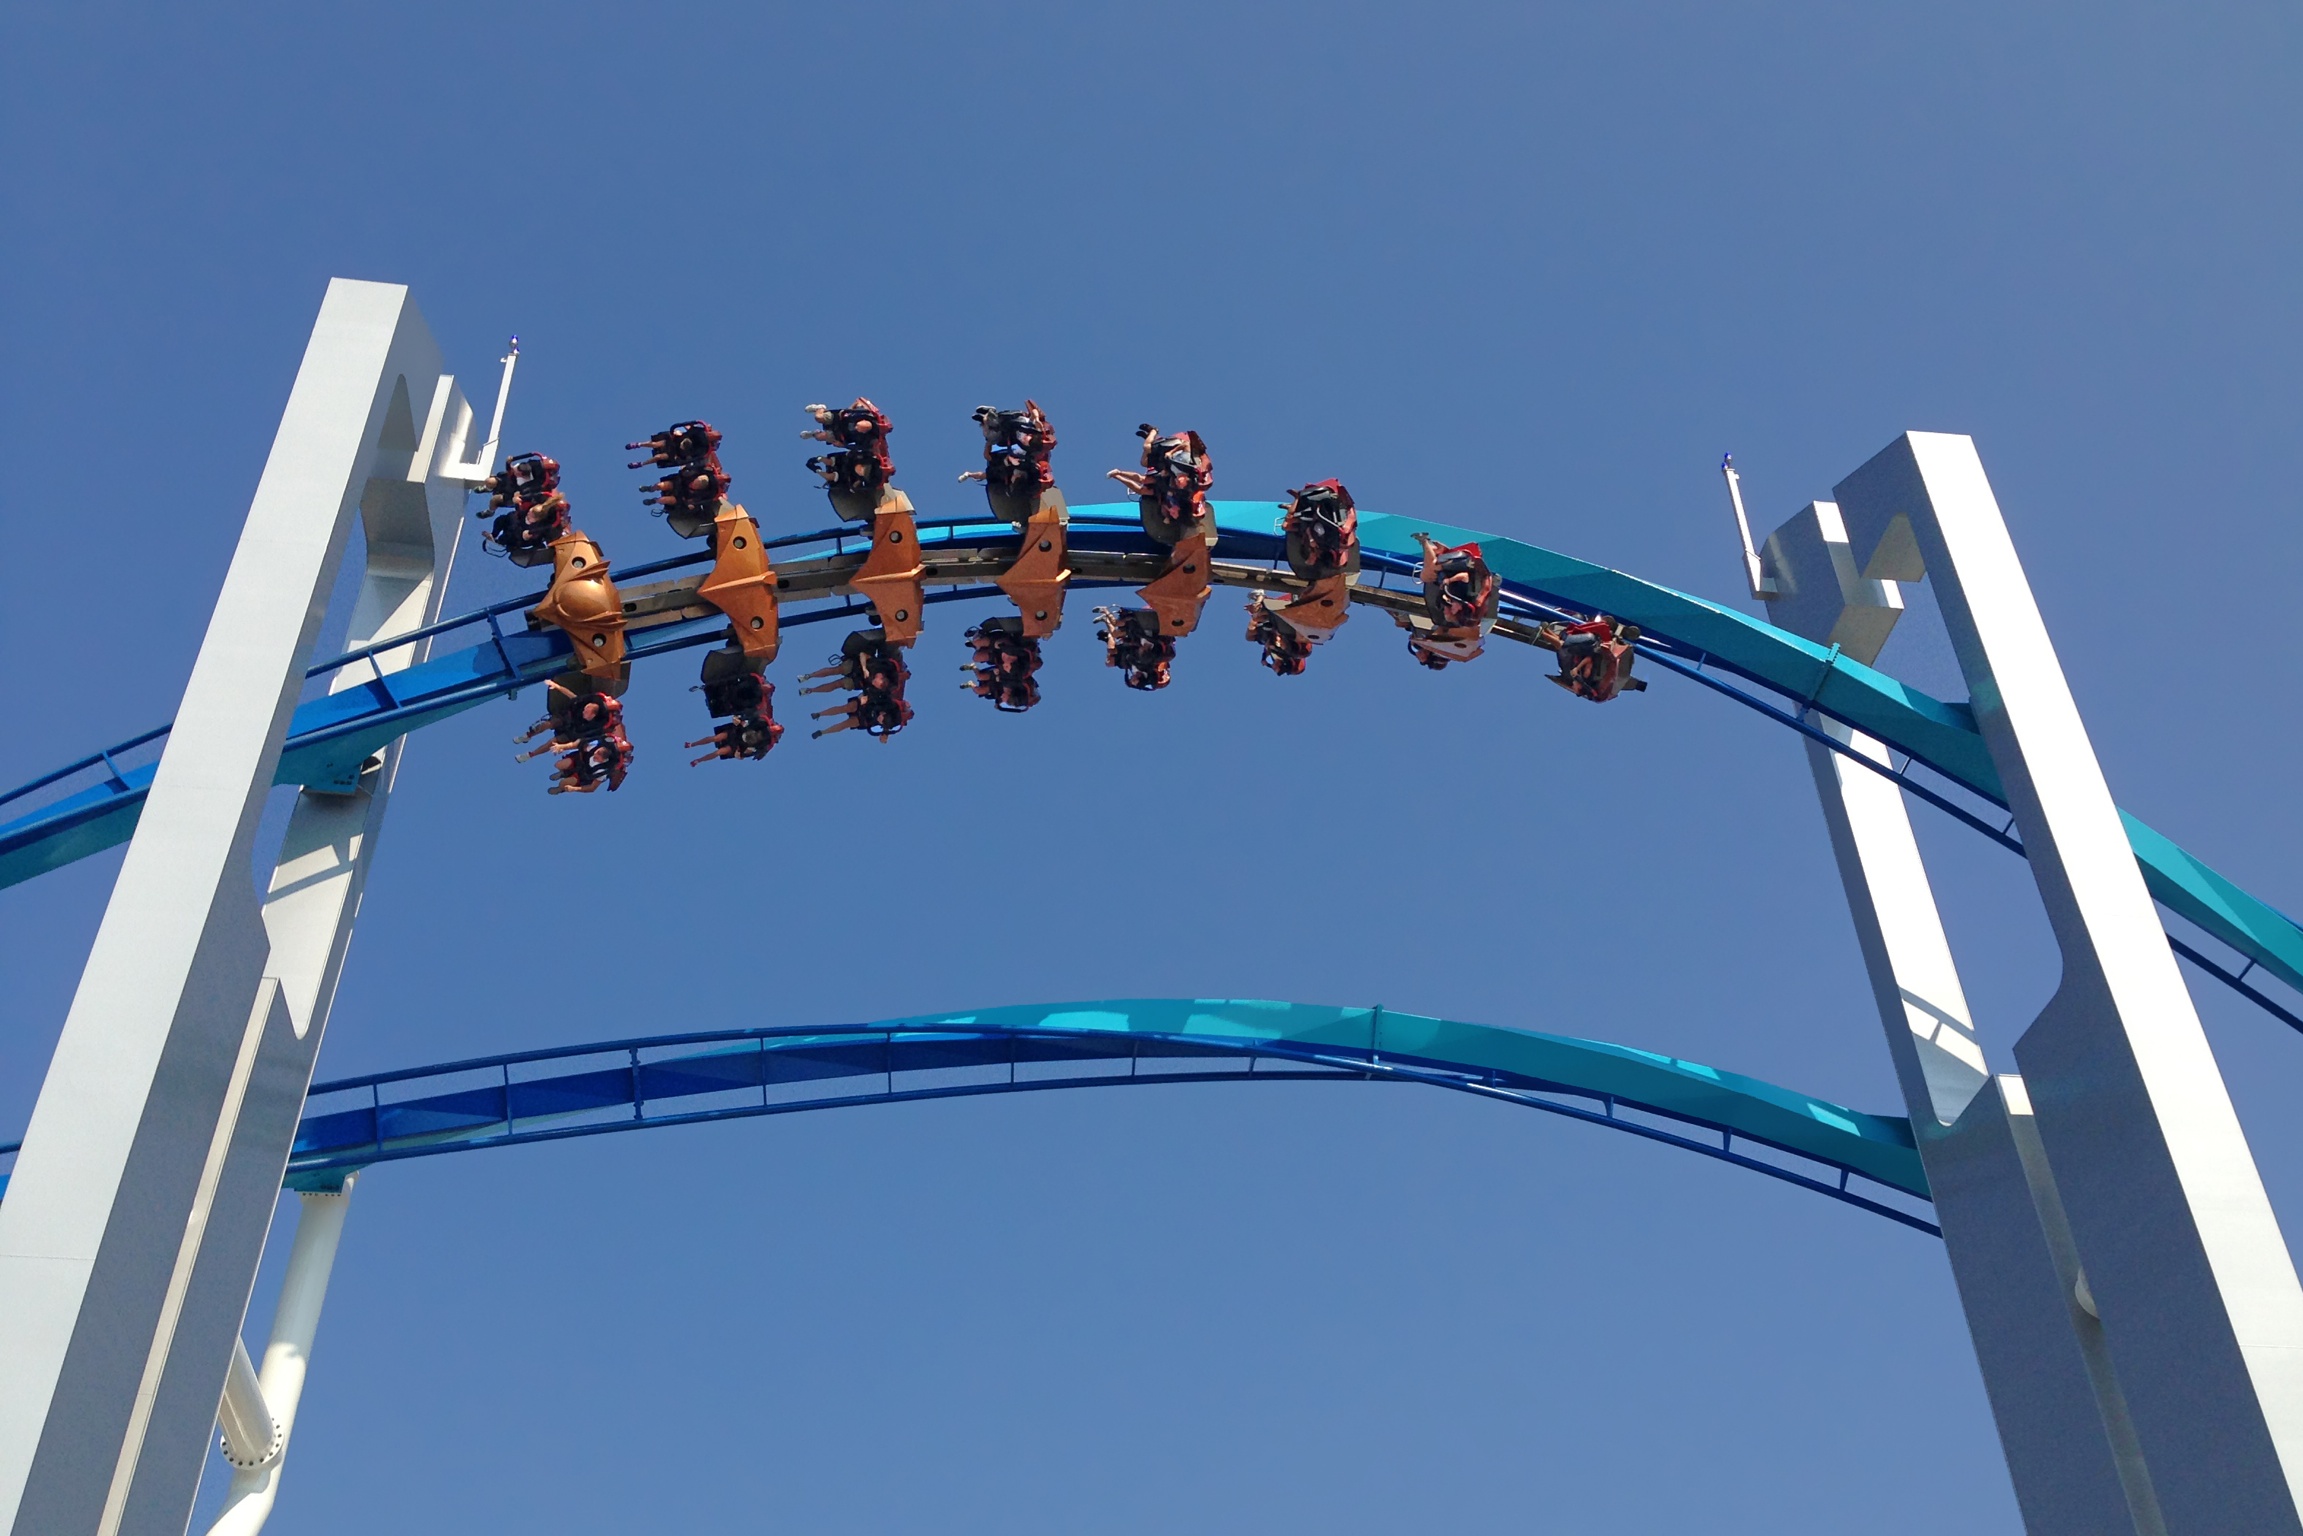 Are roller coasters safe? Here's what to know after 2 recent scares : NPR